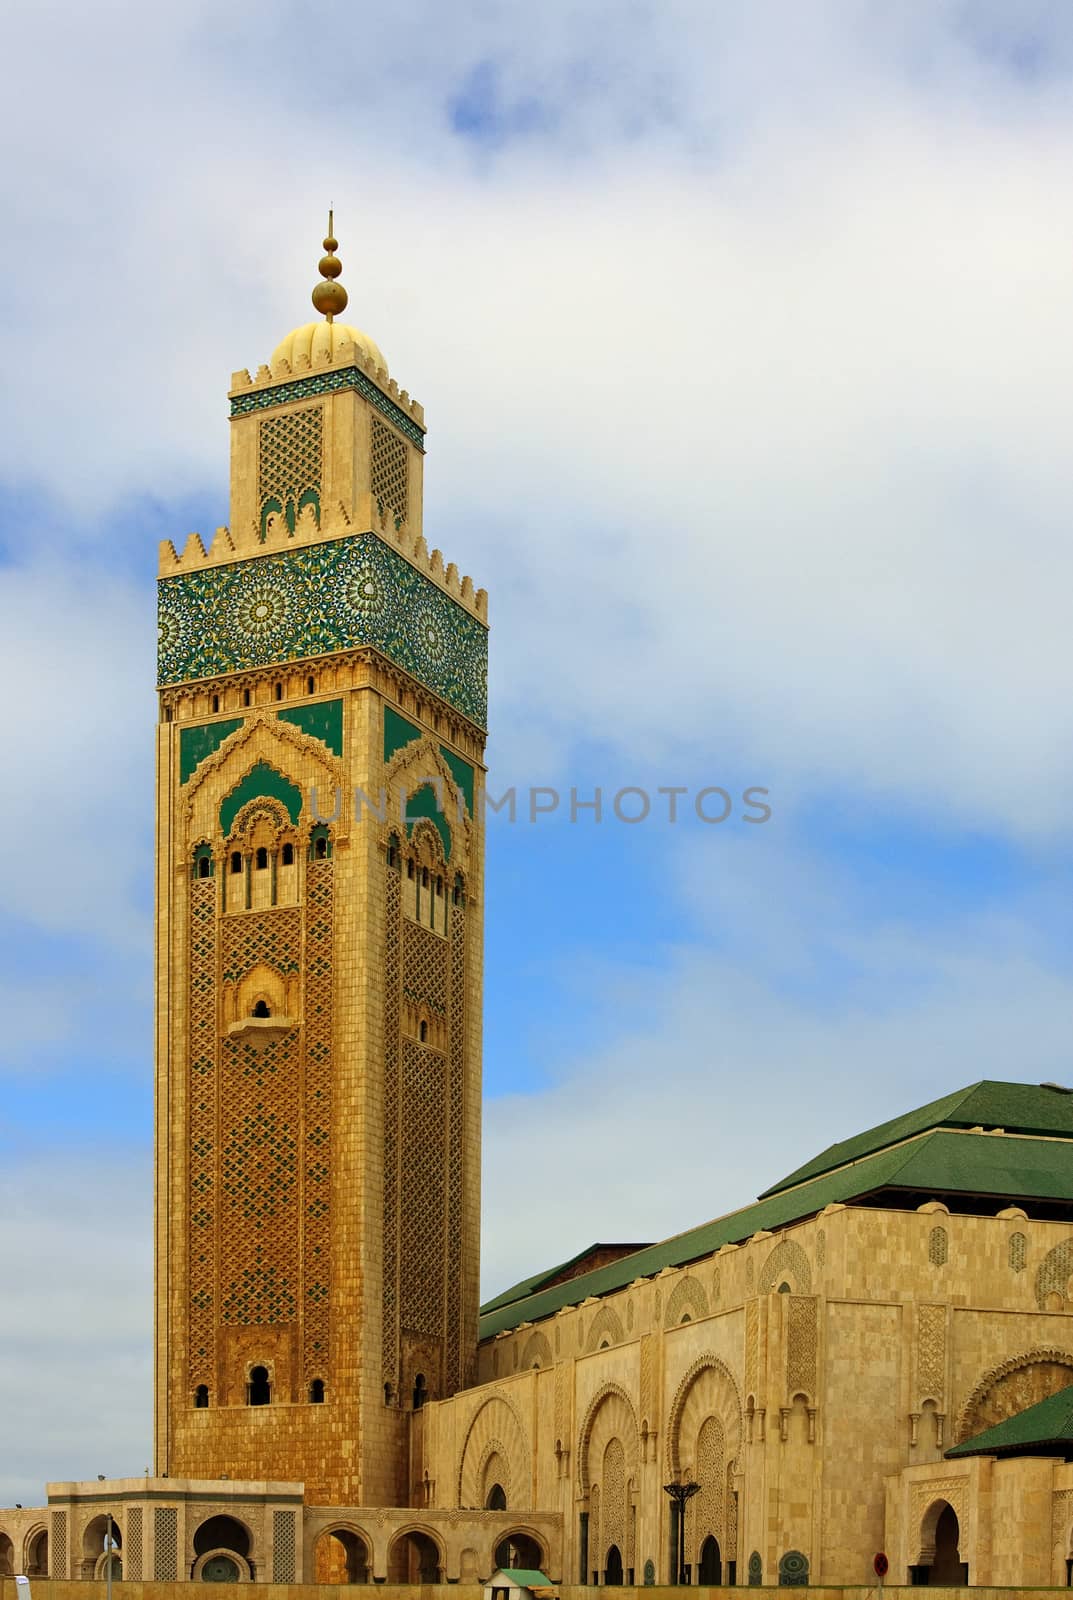 The Hassan II Mosque is situated in Casablanca, Morocco and is the seventh largest mosque in the world with the world's tallest minaret at 210 metres.